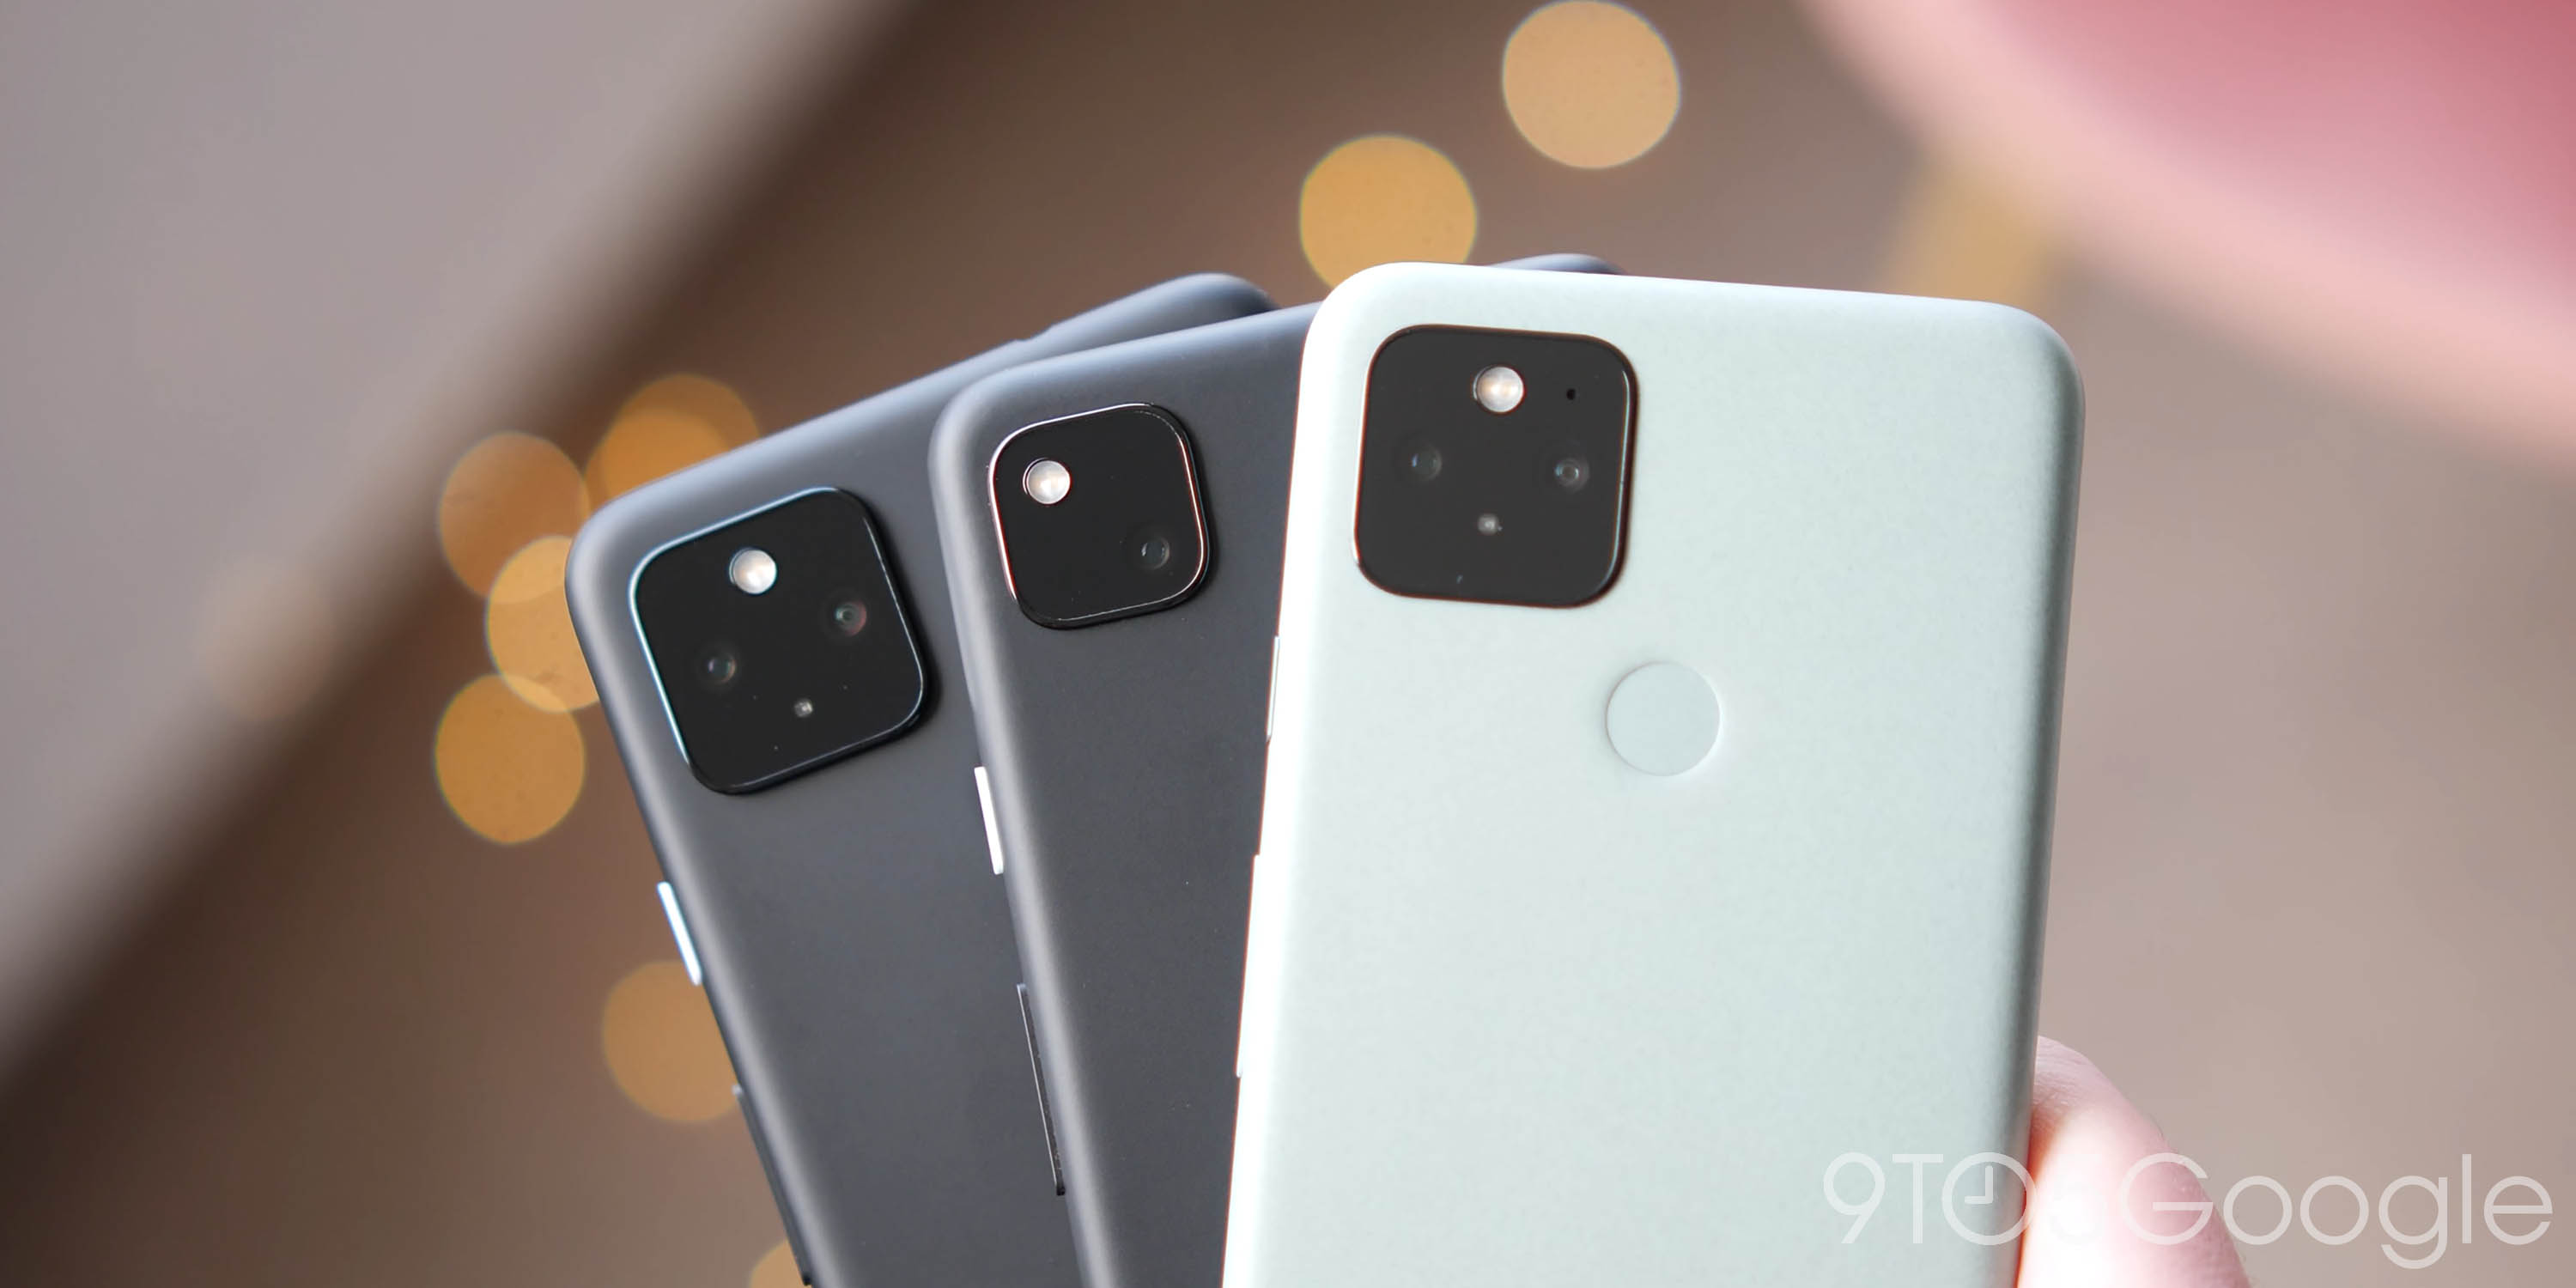 2020 Pixel buyer's guide: Which is the right Pixel for me? - 9to5Google